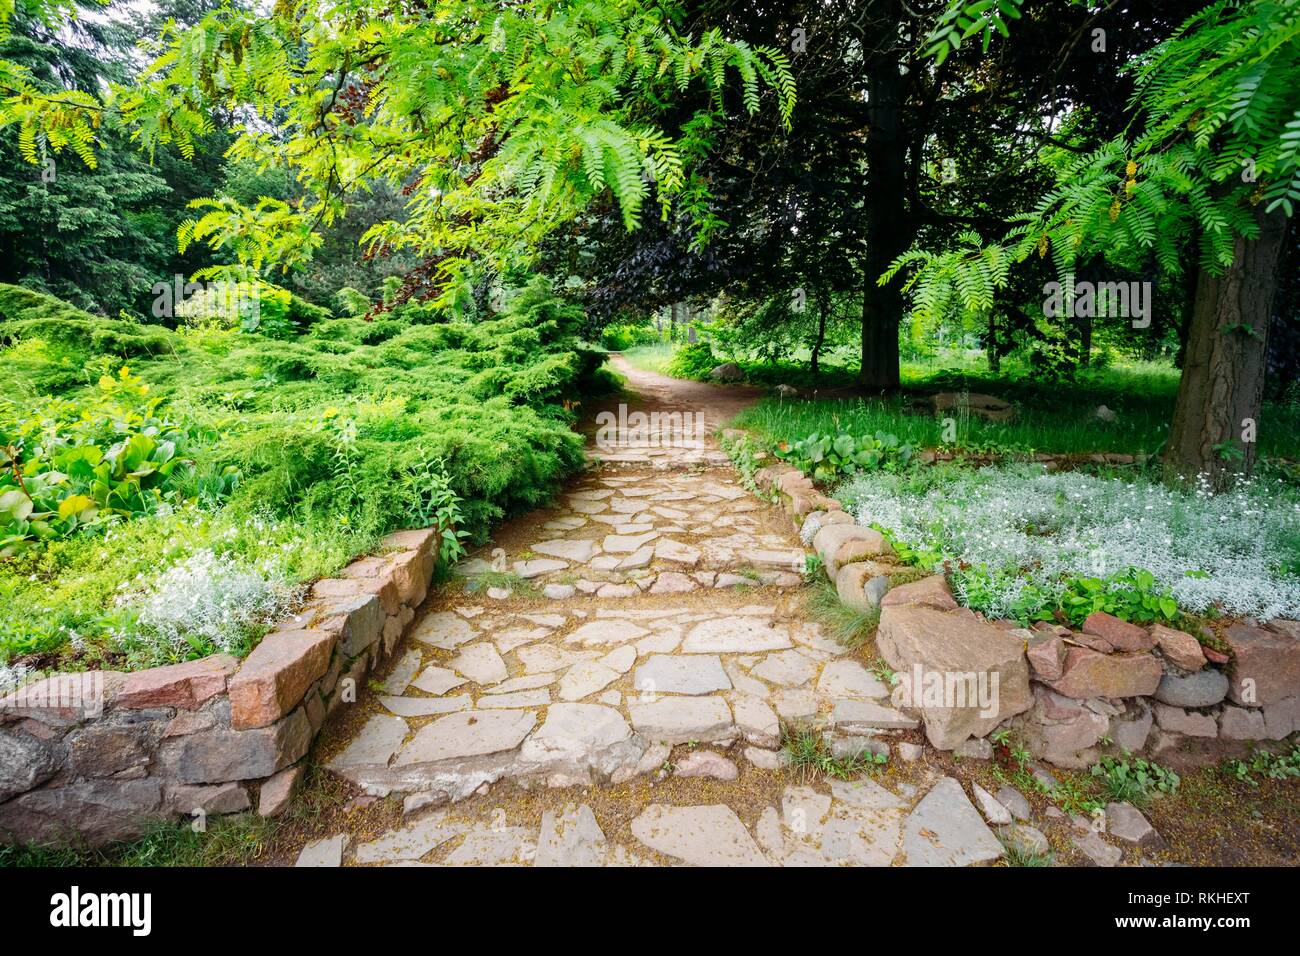 Stone Pathway Walkway Lane Path With Green Trees And Bushes In Garden. Beautiful Alley In Park. Stock Photo